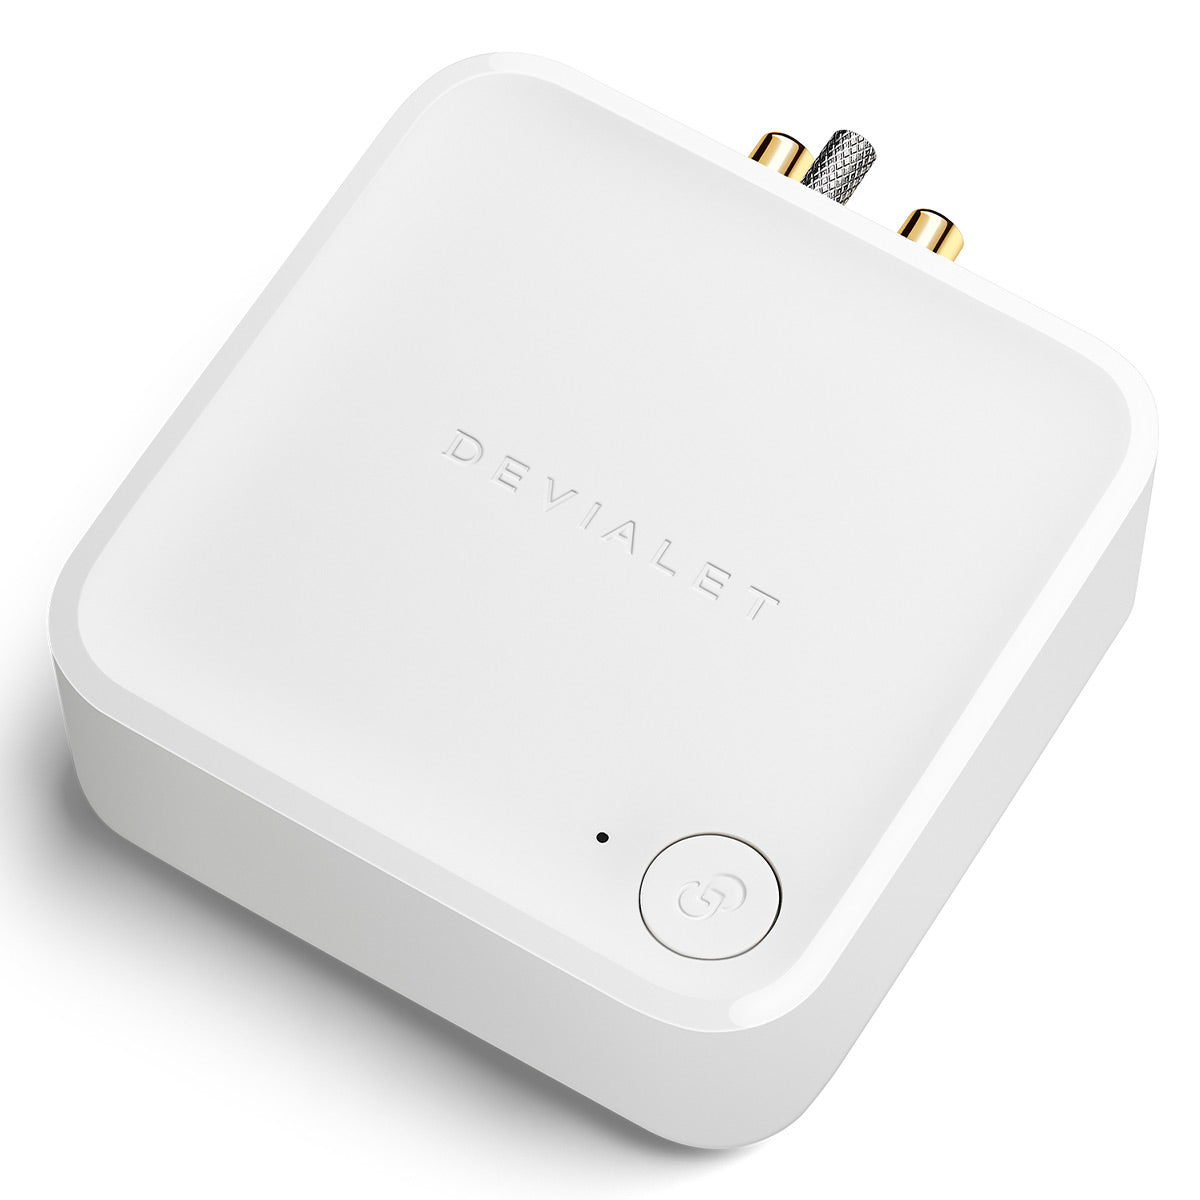 Devialet Arch Universal Connector Accessory (Iconic White)